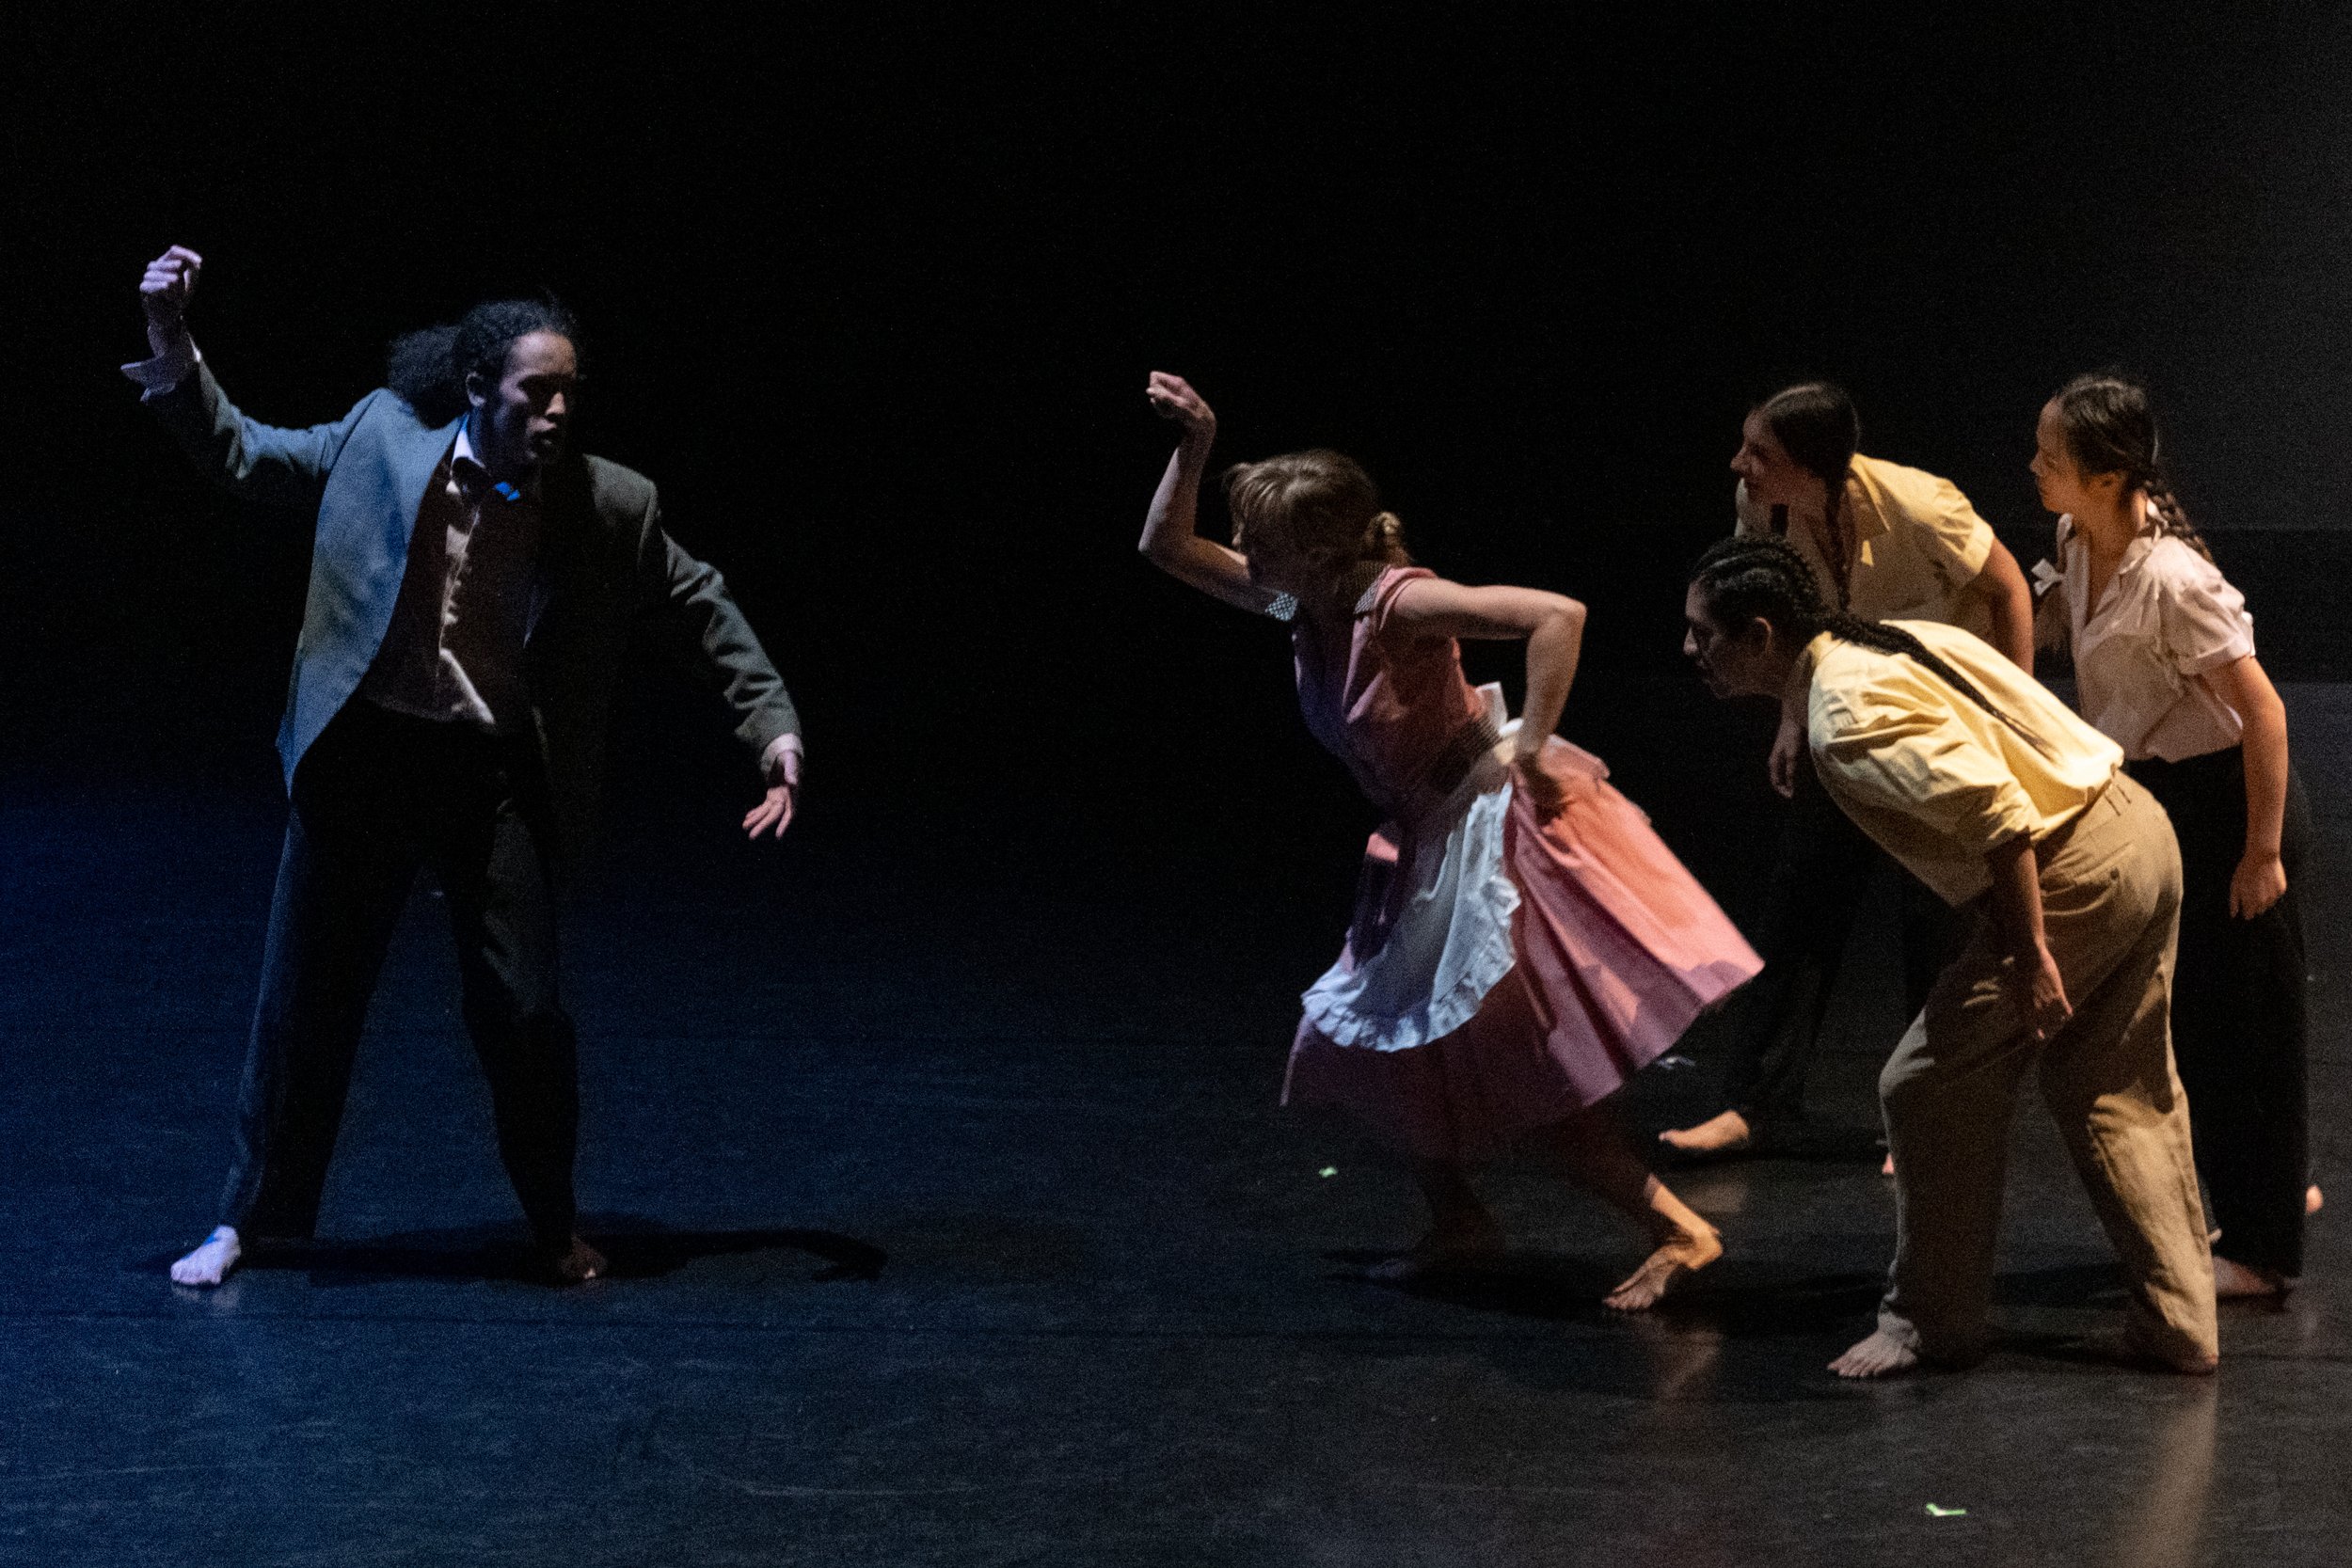  (From L to R) Dancers Hunter Ha, Monica Moe Mulvany, Abdiel Montes, Jade Lelievre and Annie Lee rehearse a piece choreographed by Derrick Paris for the Santa Monica College Contemporary Dance Performance Synapse at BroadStage in Santa Monica, Calif.